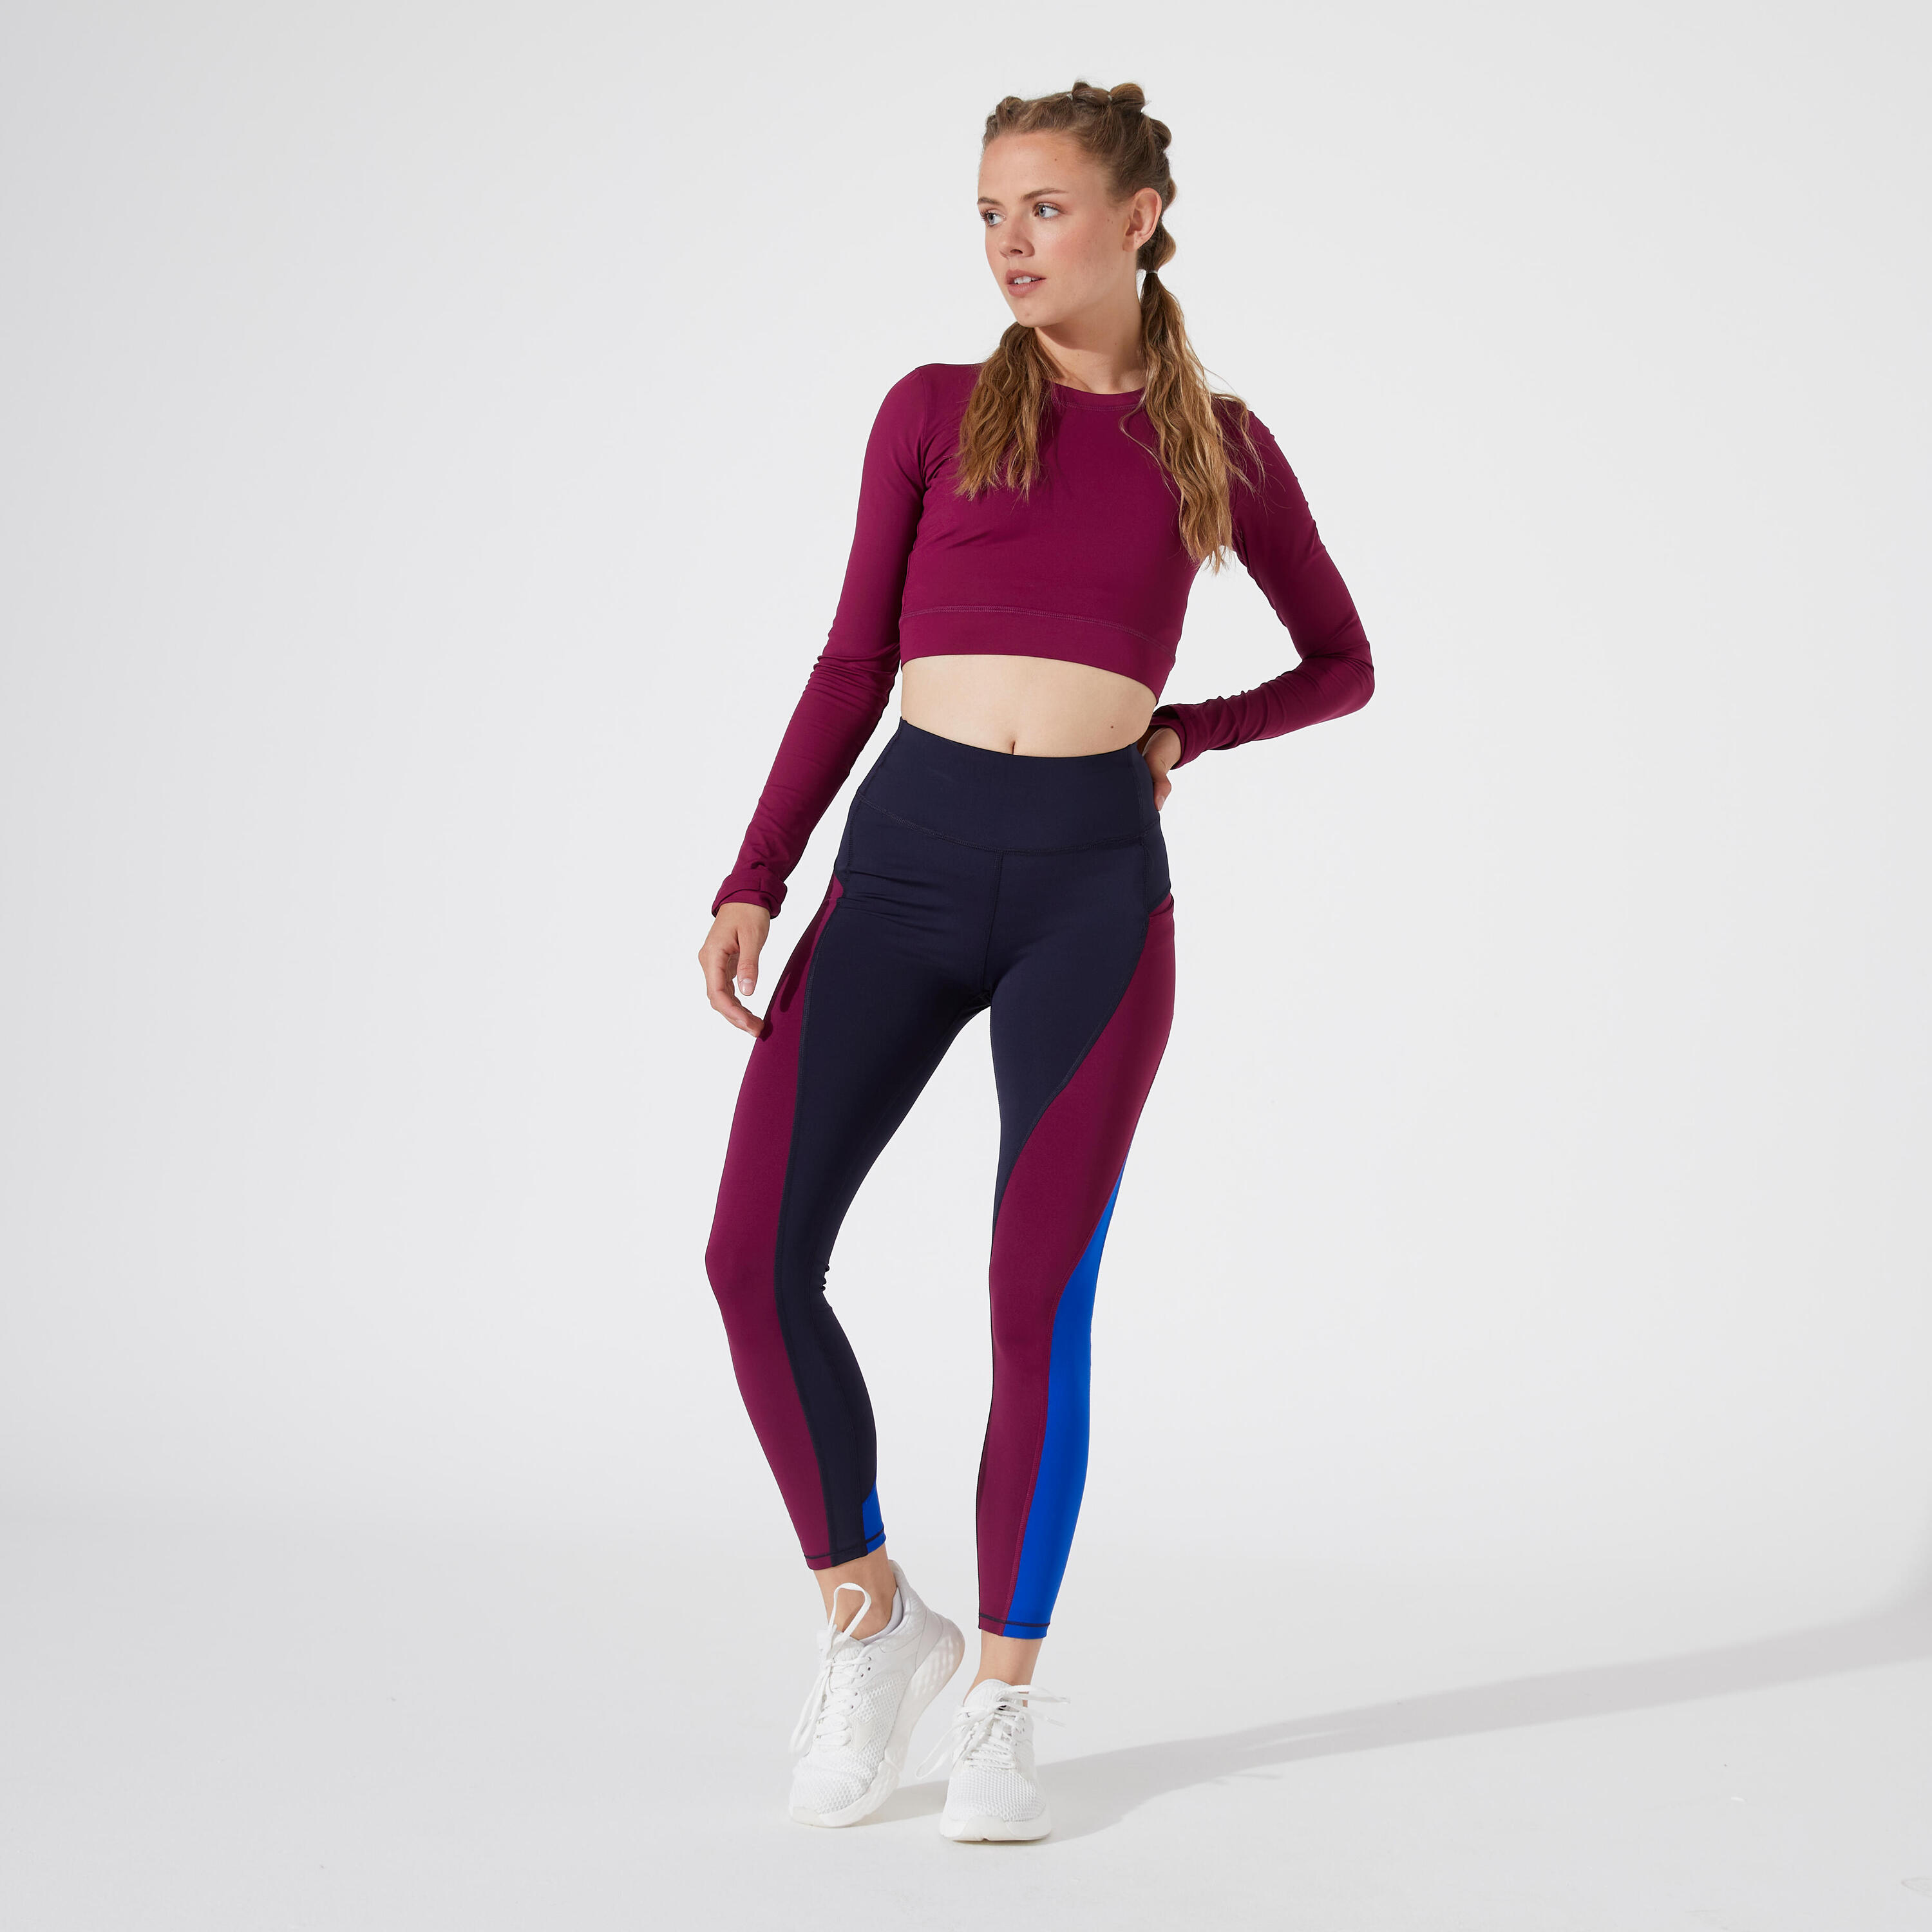 Women's Fitness Long-Sleeved Cropped T-Shirt - Purple 2/5